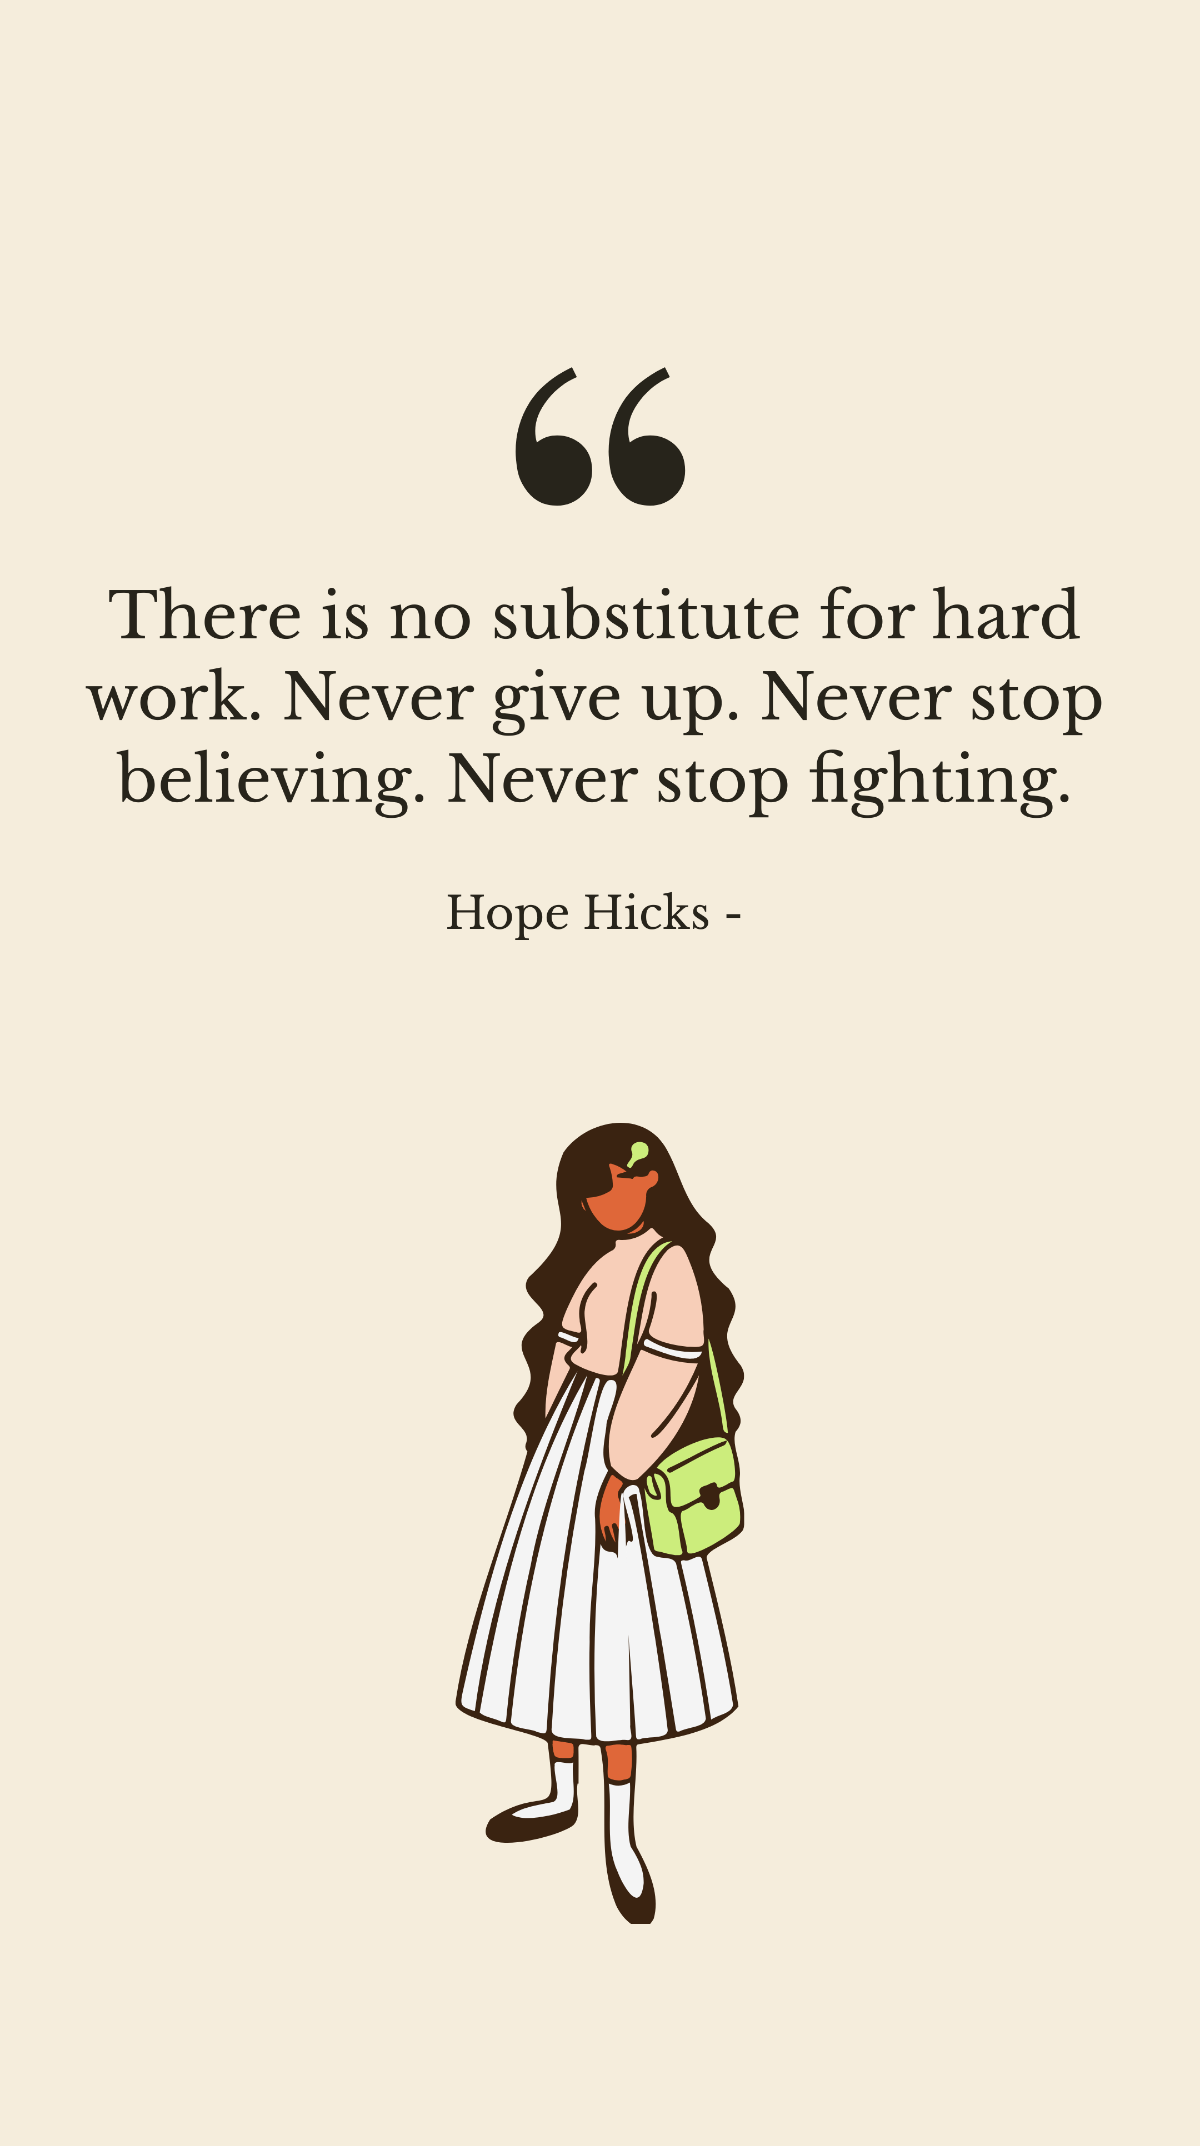 Free Hope Hicks - There is no substitute for hard work. Never give up. Never stop believing. Never stop fighting. Template